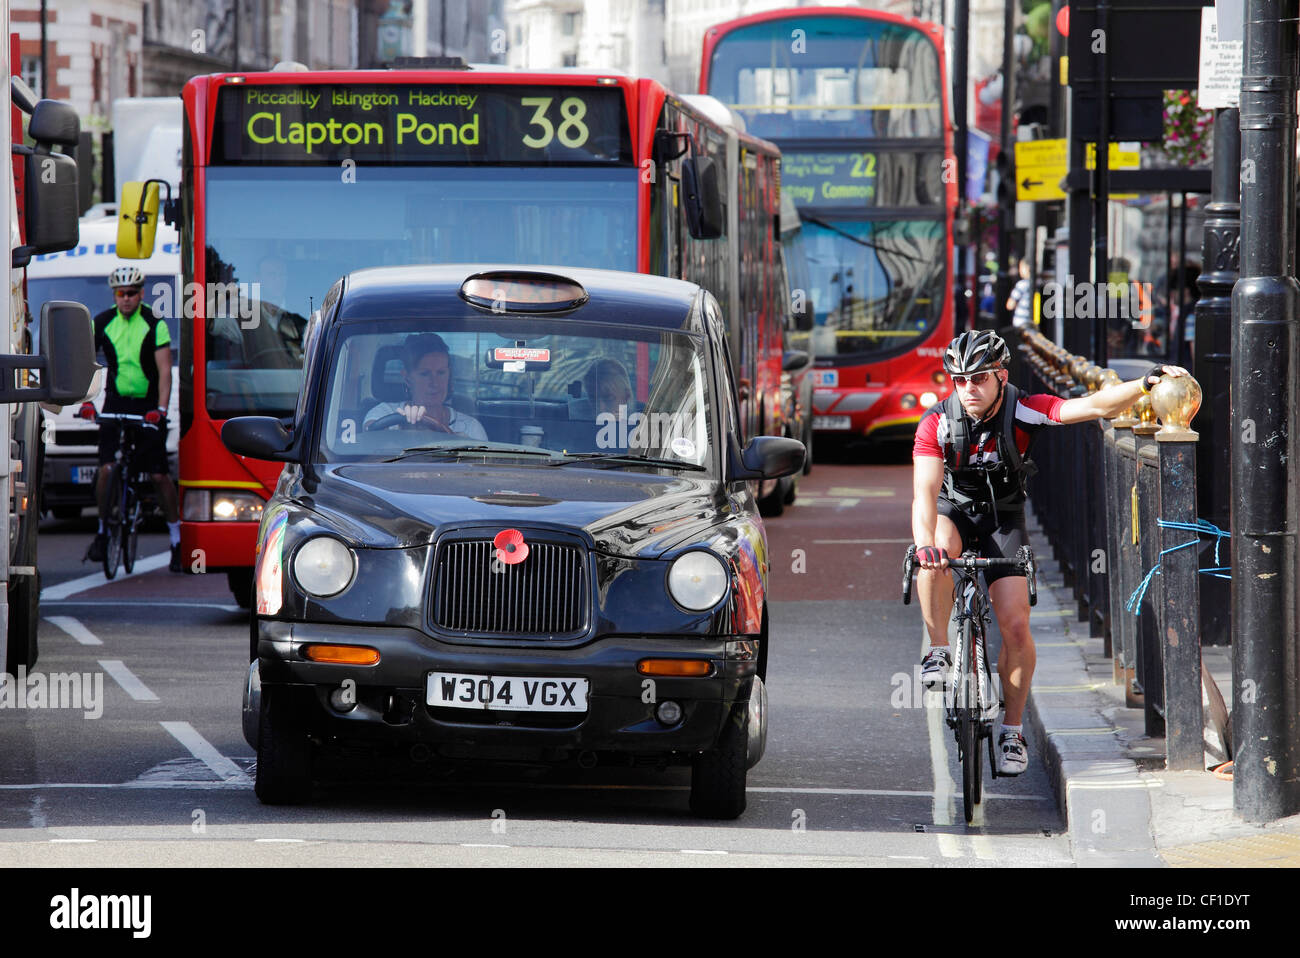 Cyclists, busses and taxis waiting at traffic lights in Piccadilly. Stock Photo